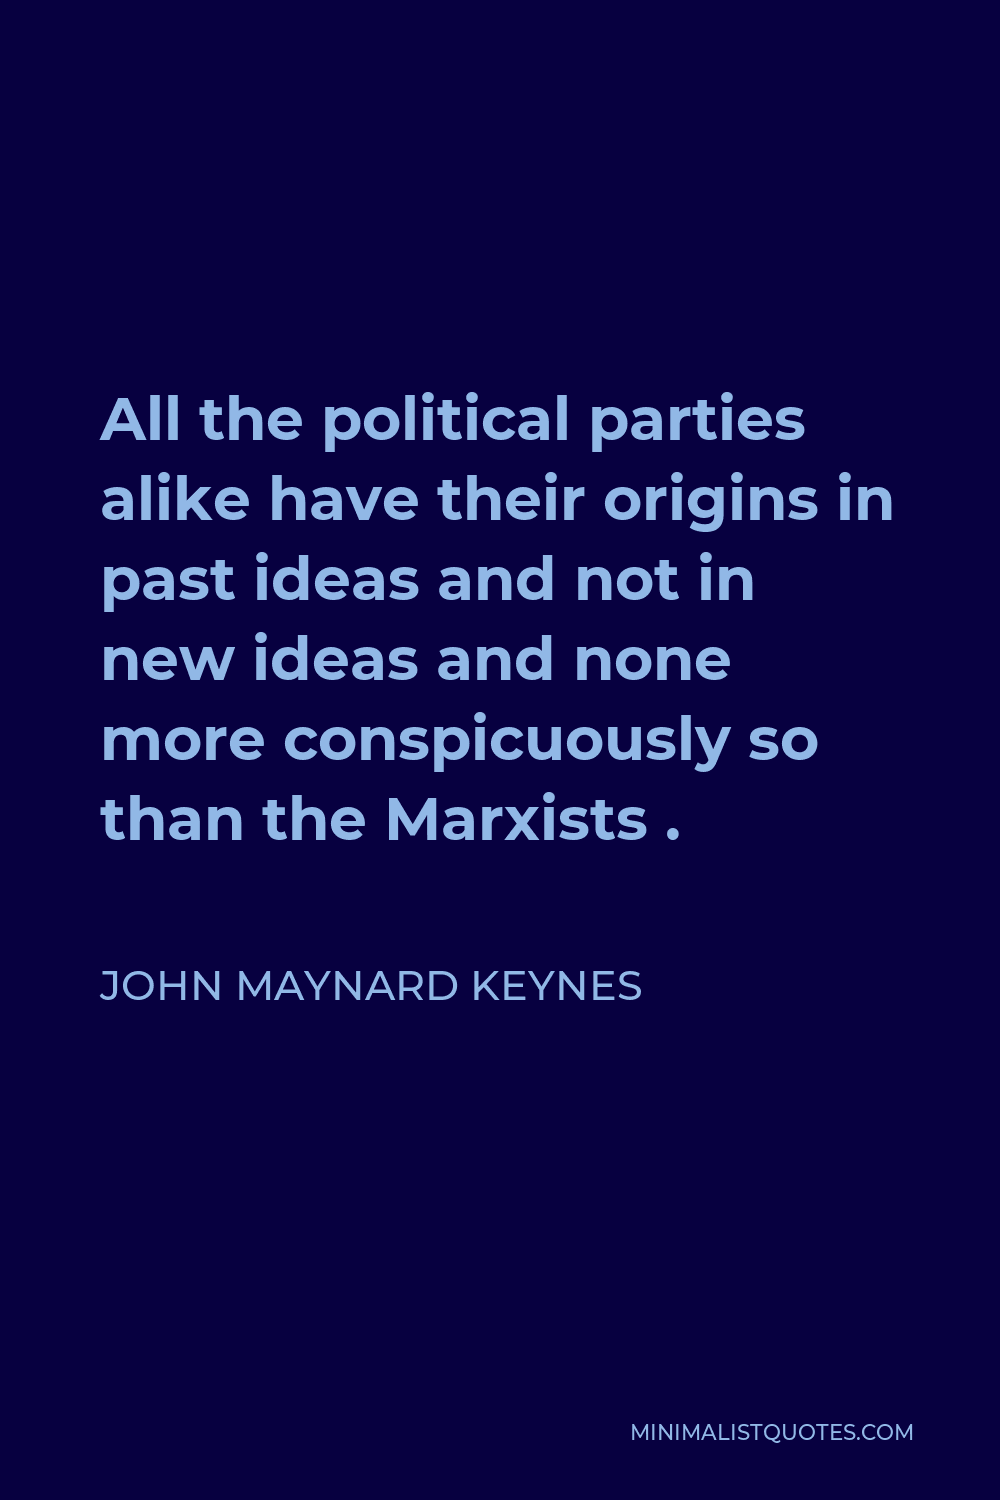 John Maynard Keynes Quote - All the political parties alike have their origins in past ideas and not in new ideas and none more conspicuously so than the Marxists .